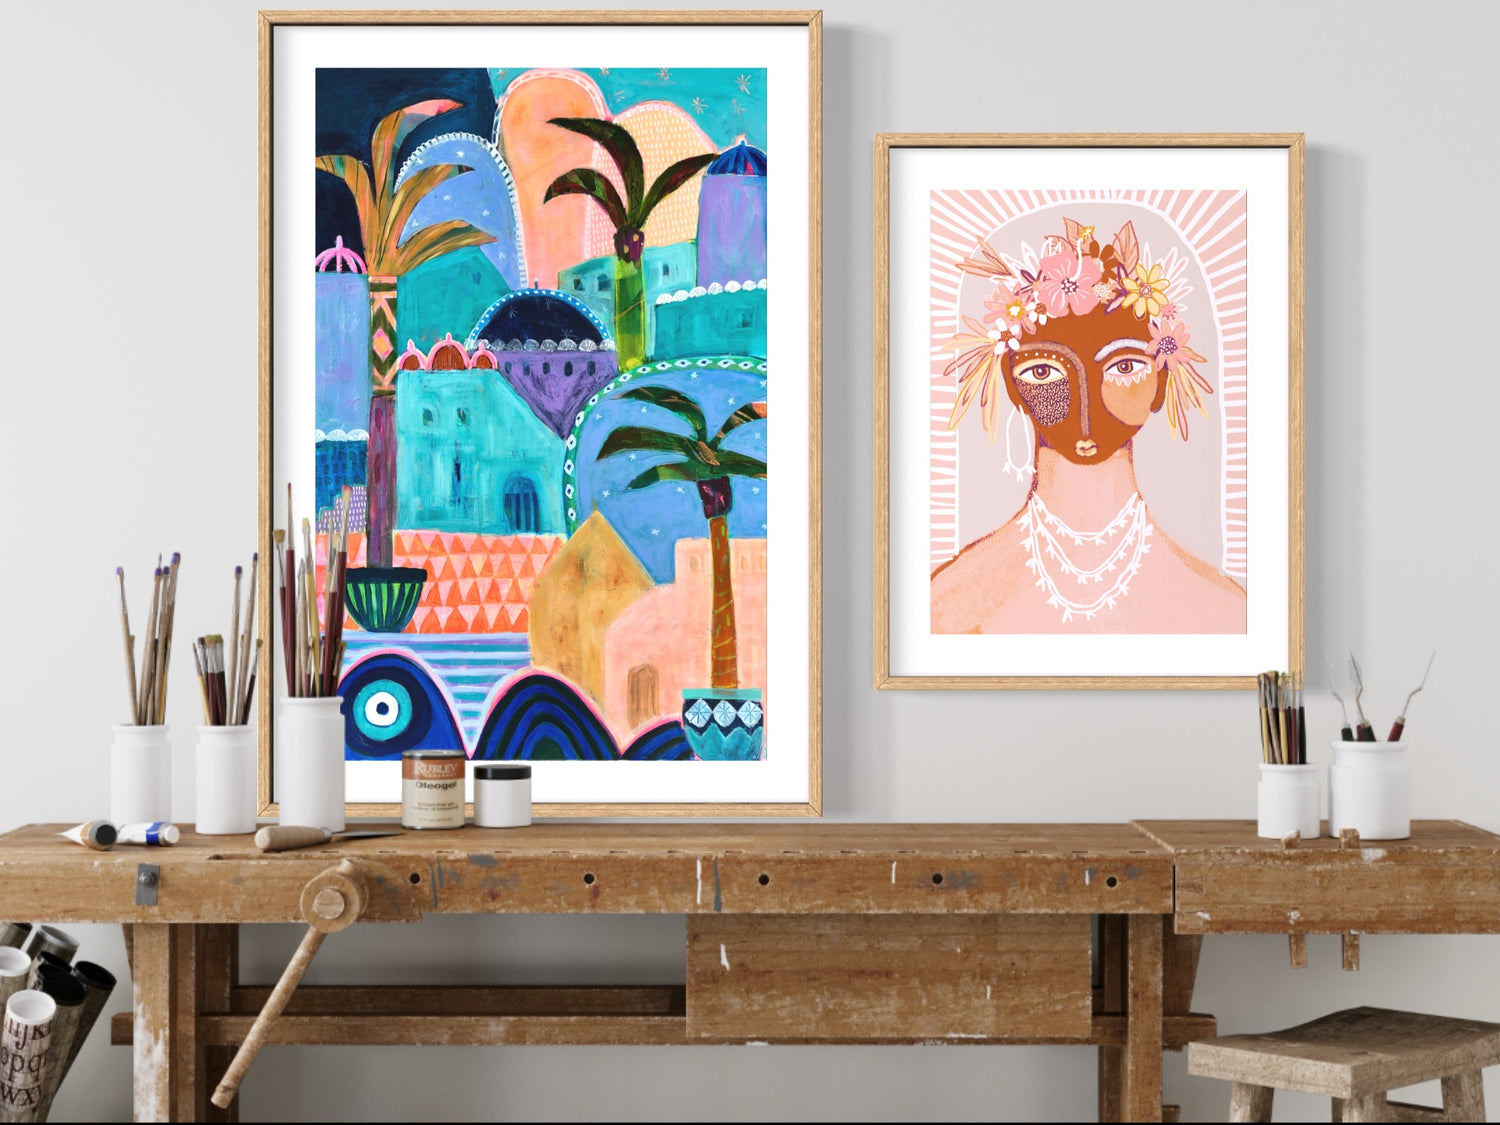 Artist studio wall with Moroccan style art work in multi colours and a framed fine art print of a warrior woman